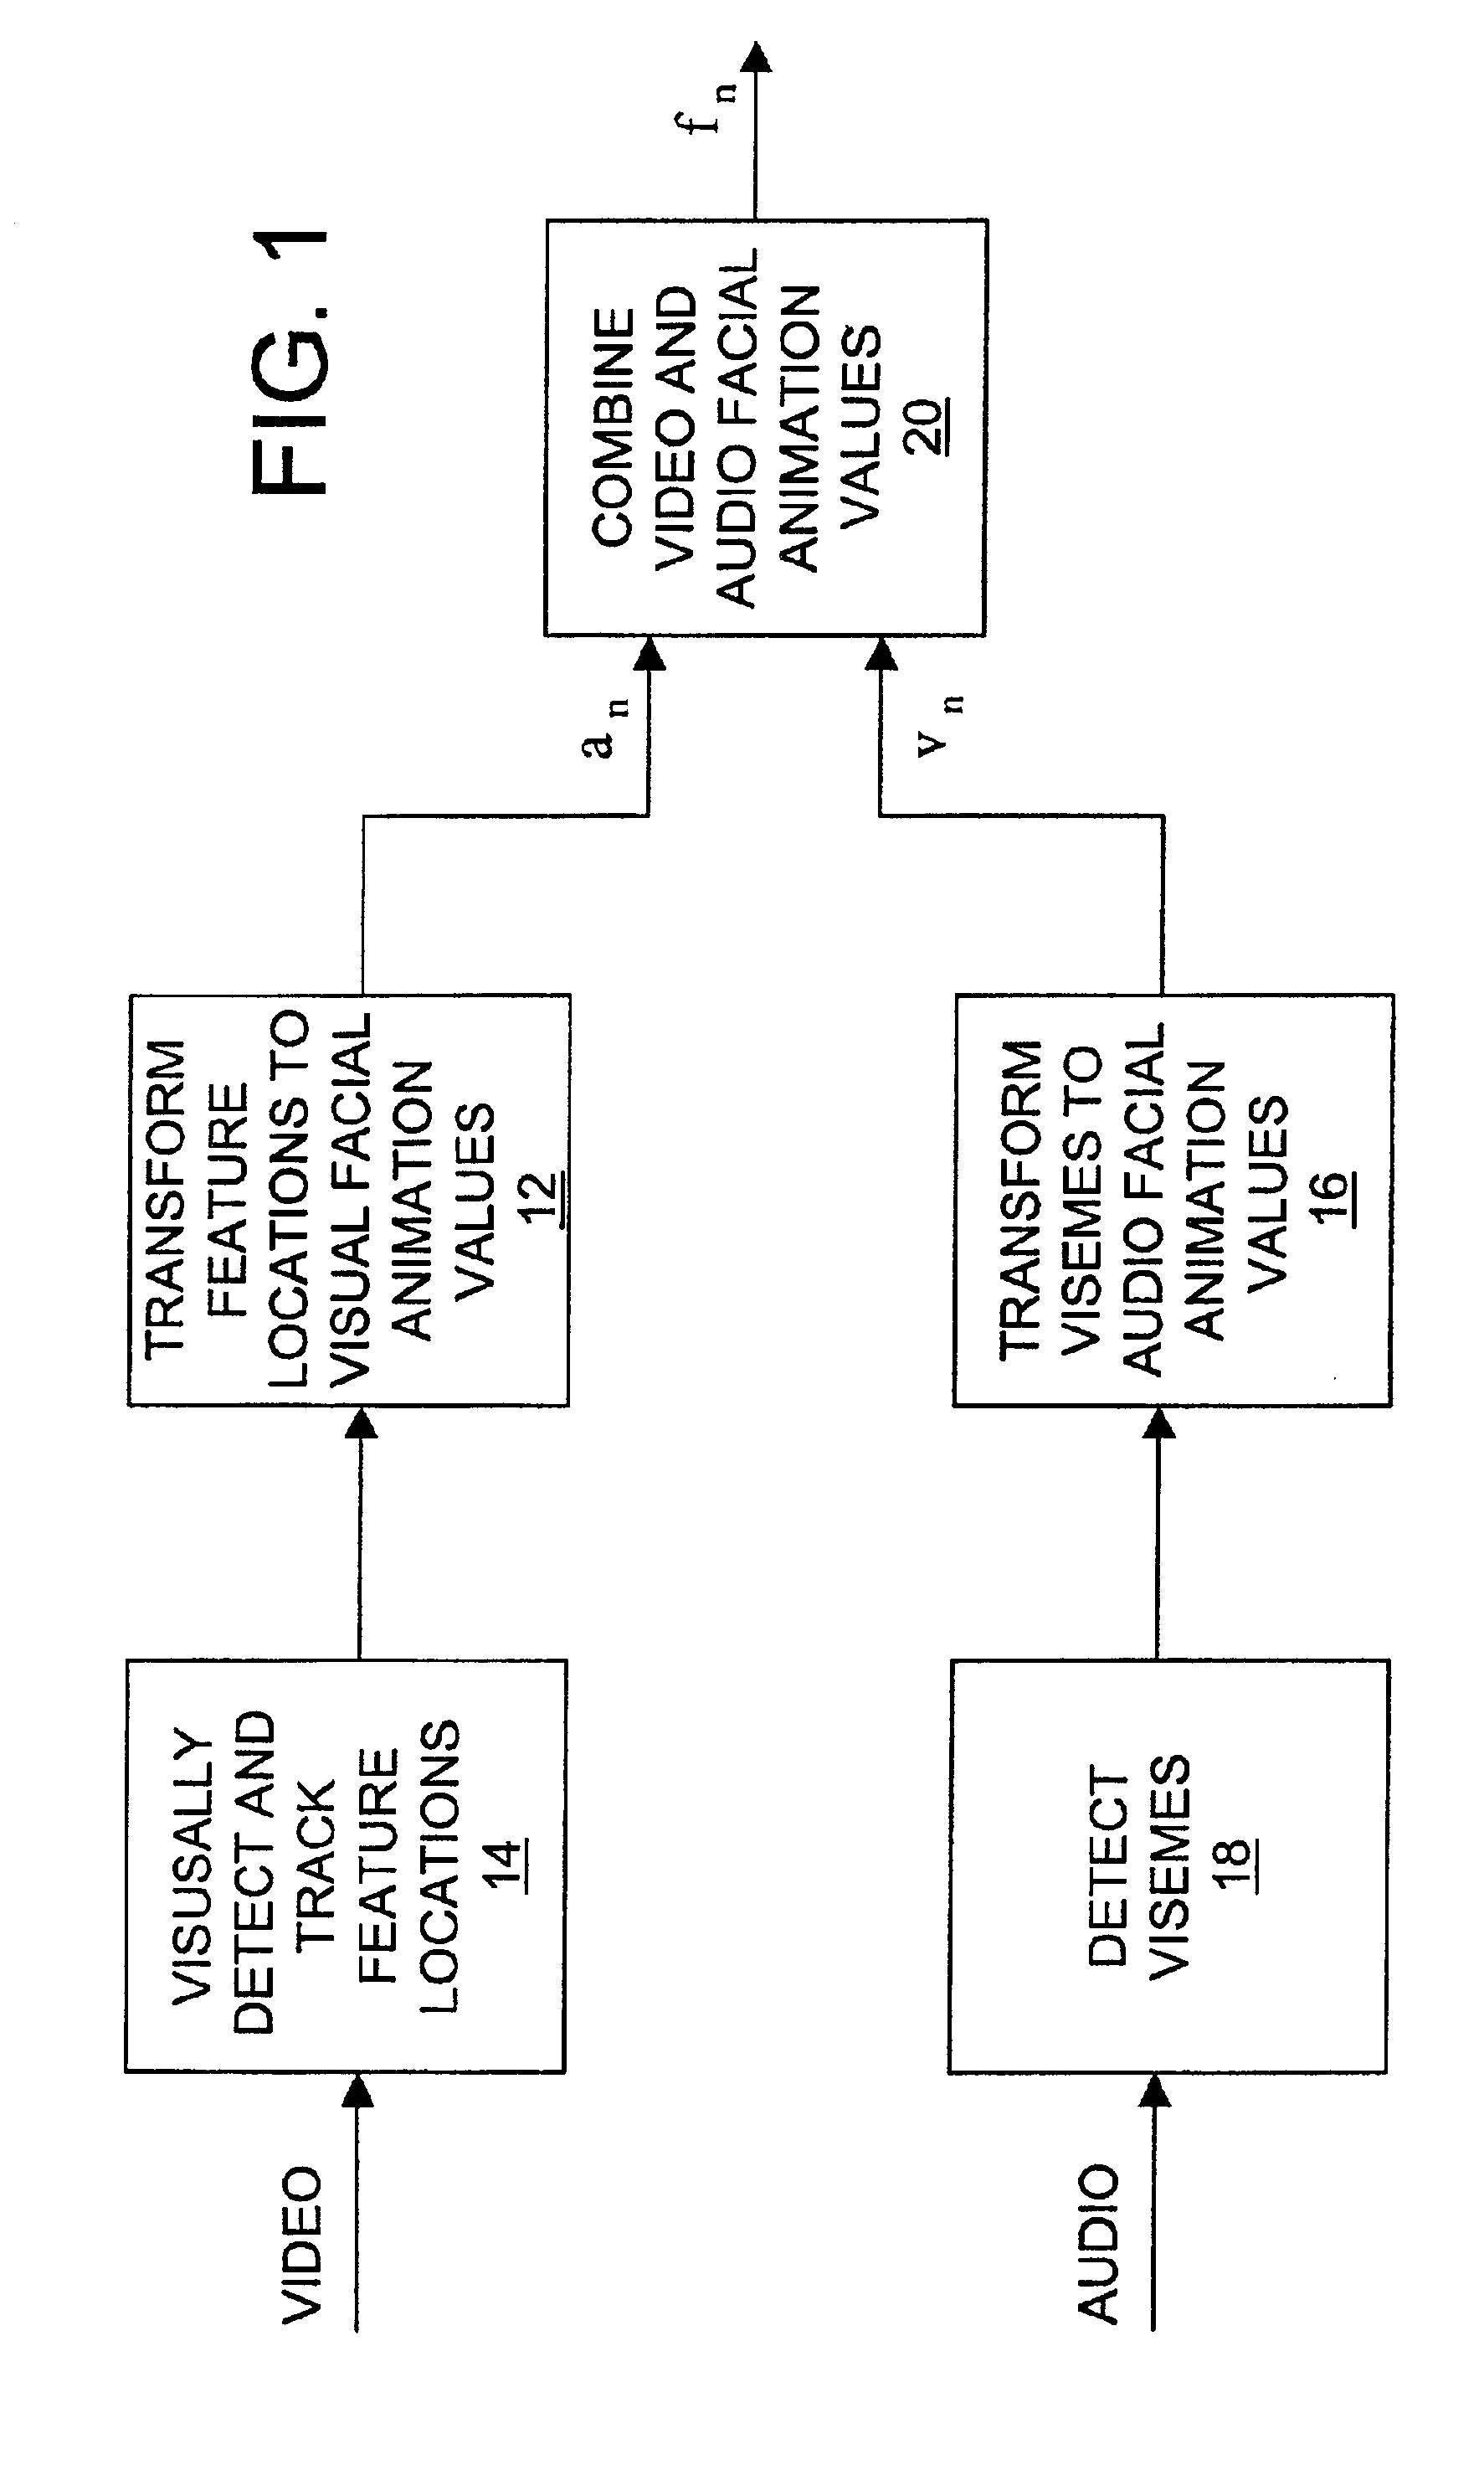 Method and system for generating facial animation values based on a combination of visual and audio information